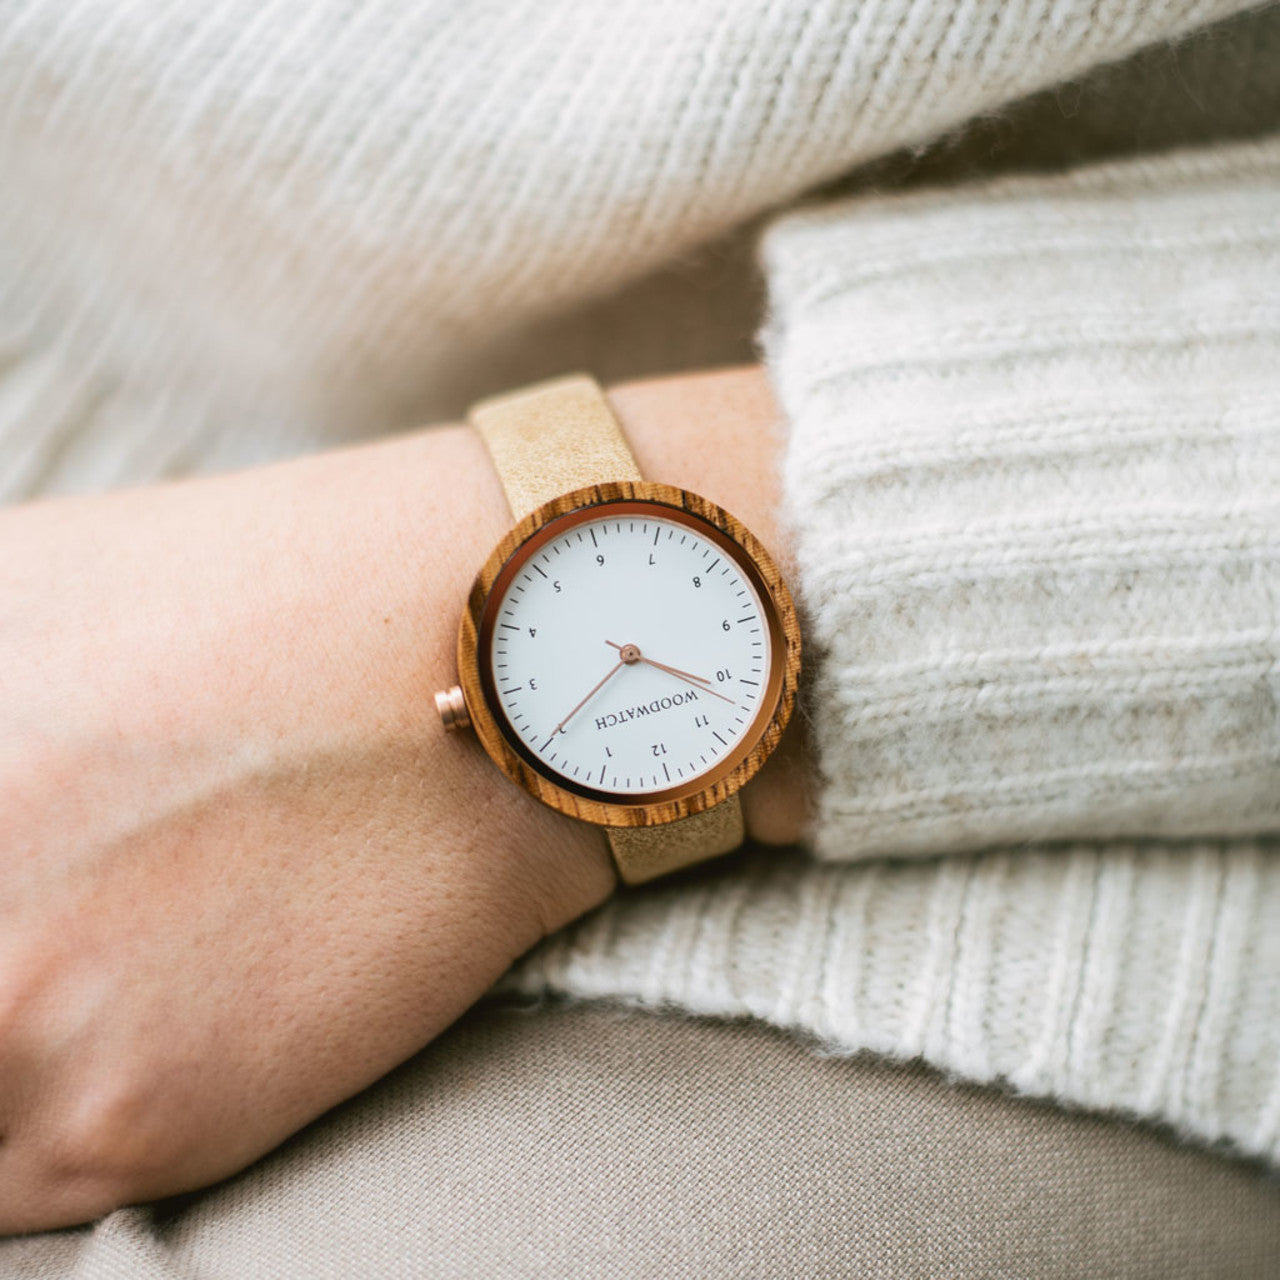 Oslo（オスロ）- NORDIC collection / WoodWatch